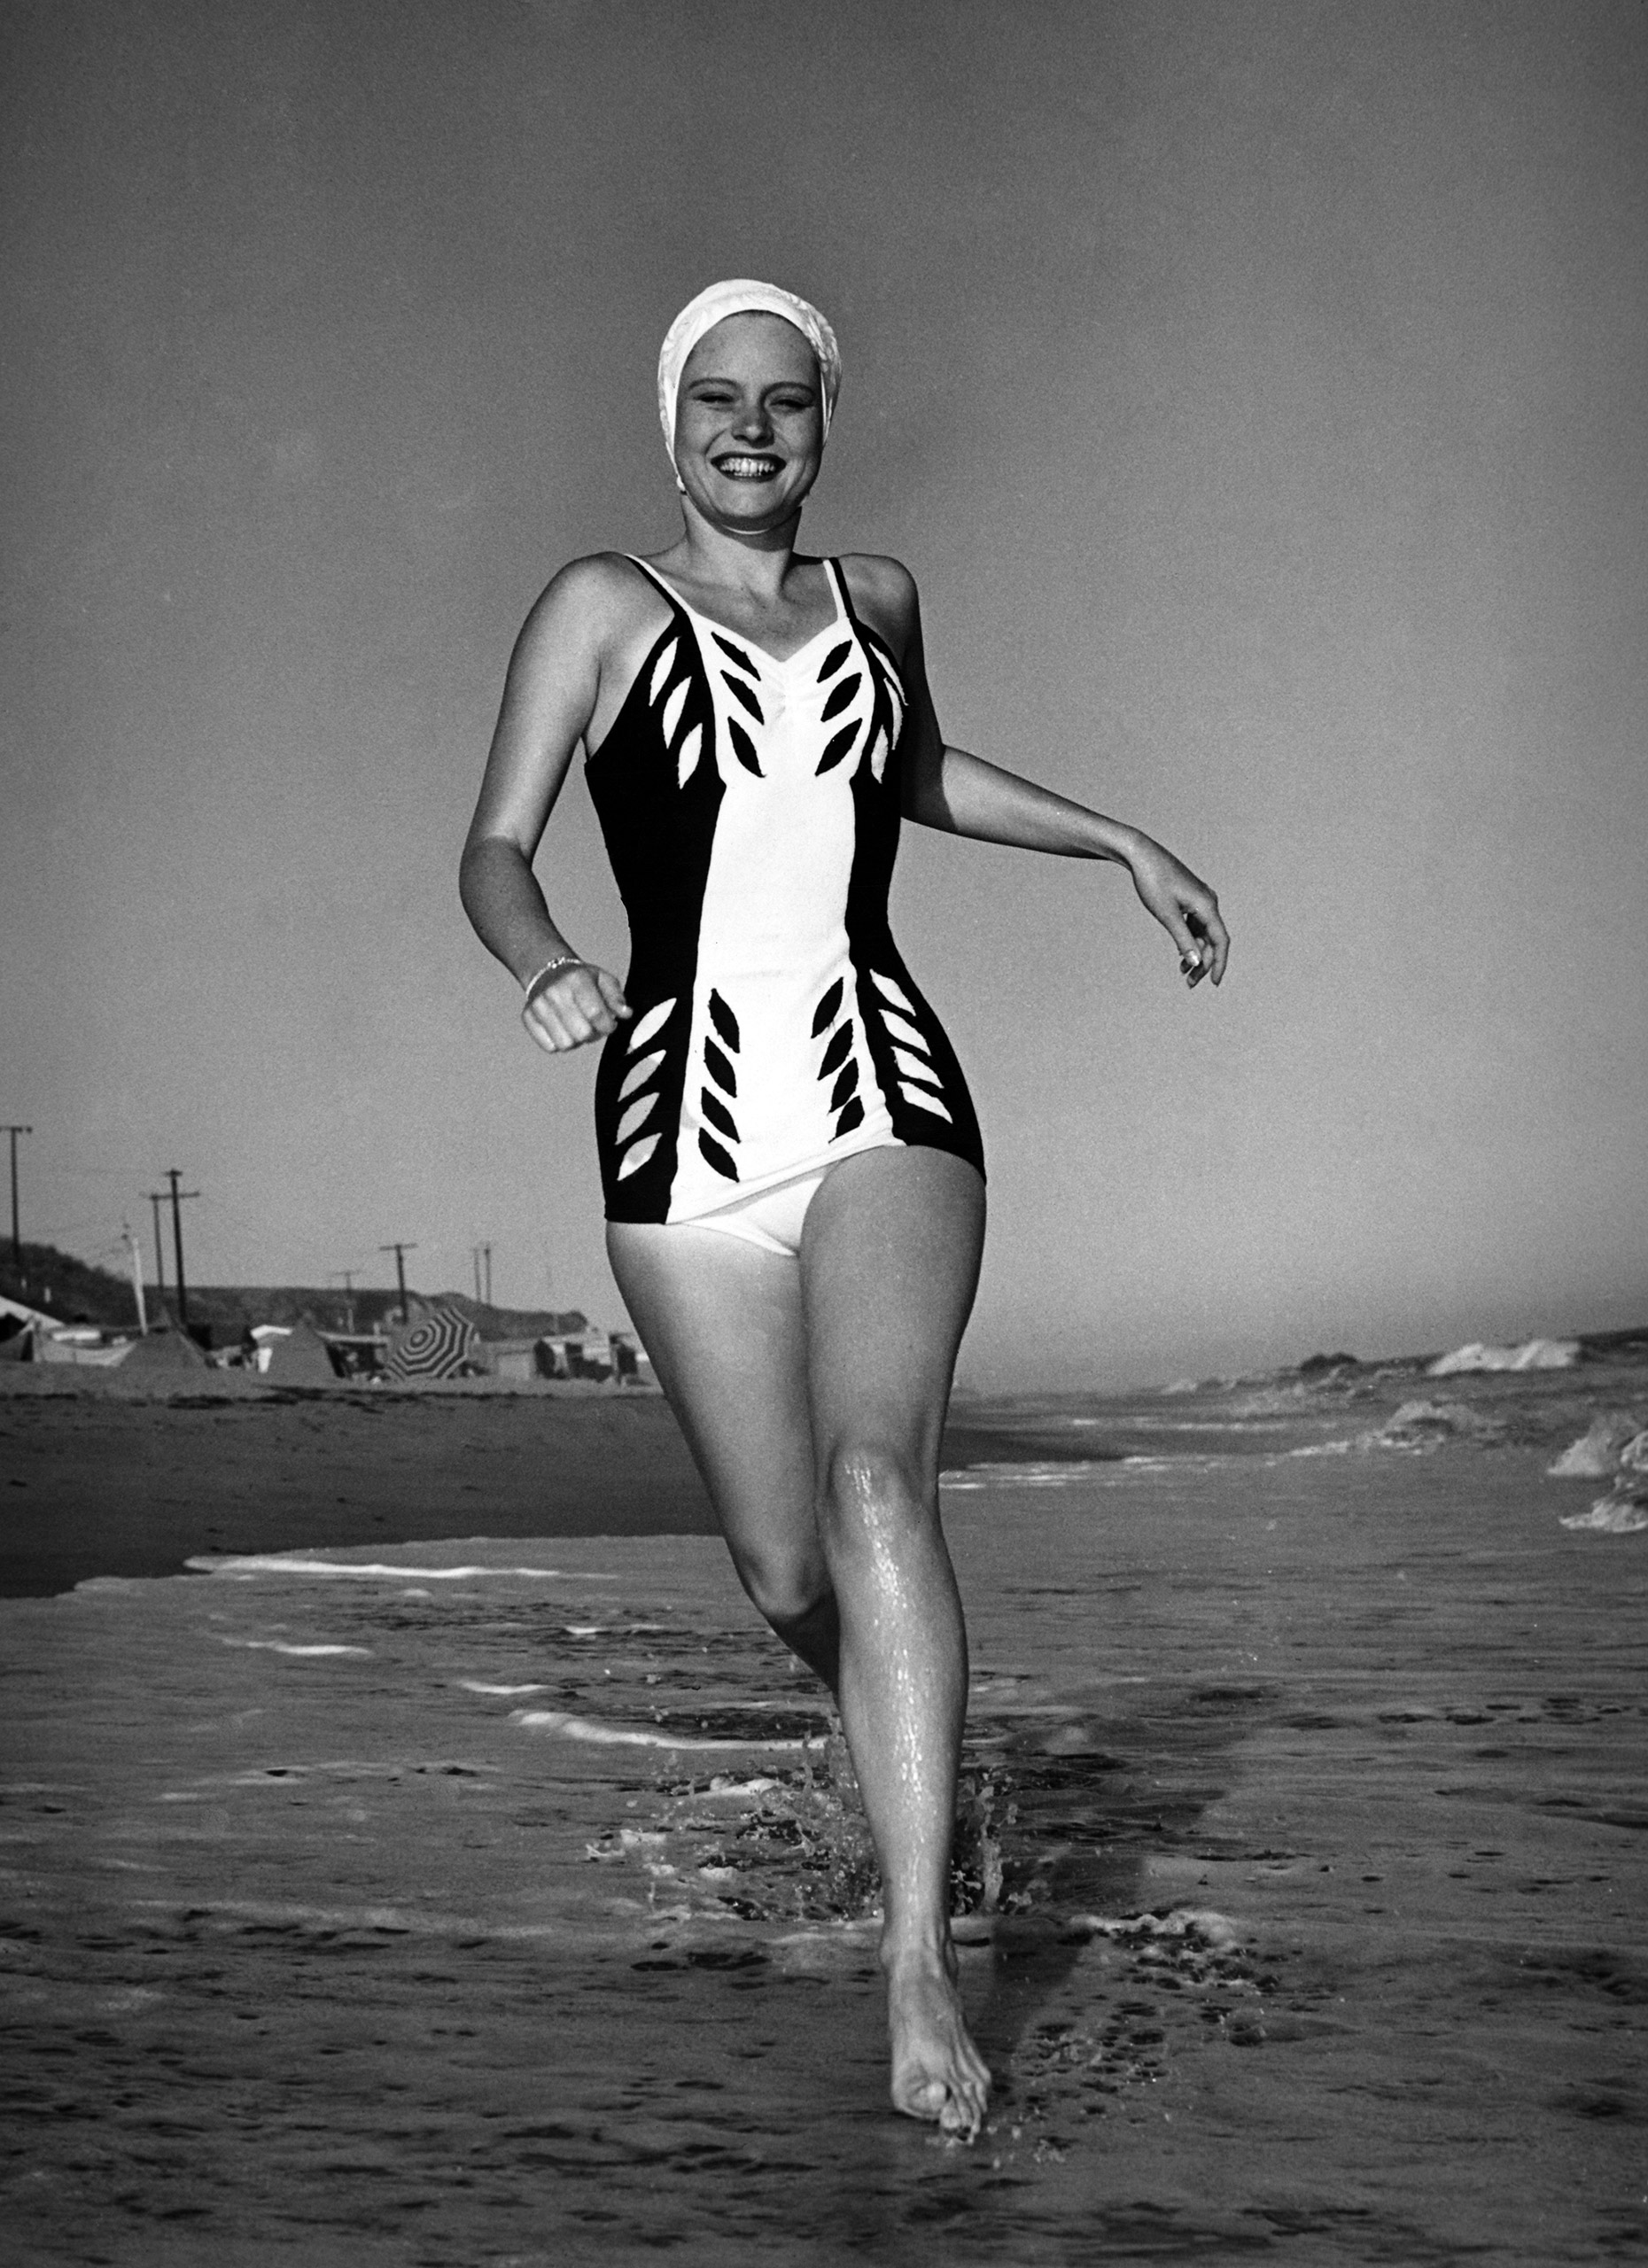 Actress Alexis Smith in a swimming costume running along the beach in southern California, USA circa 1940.